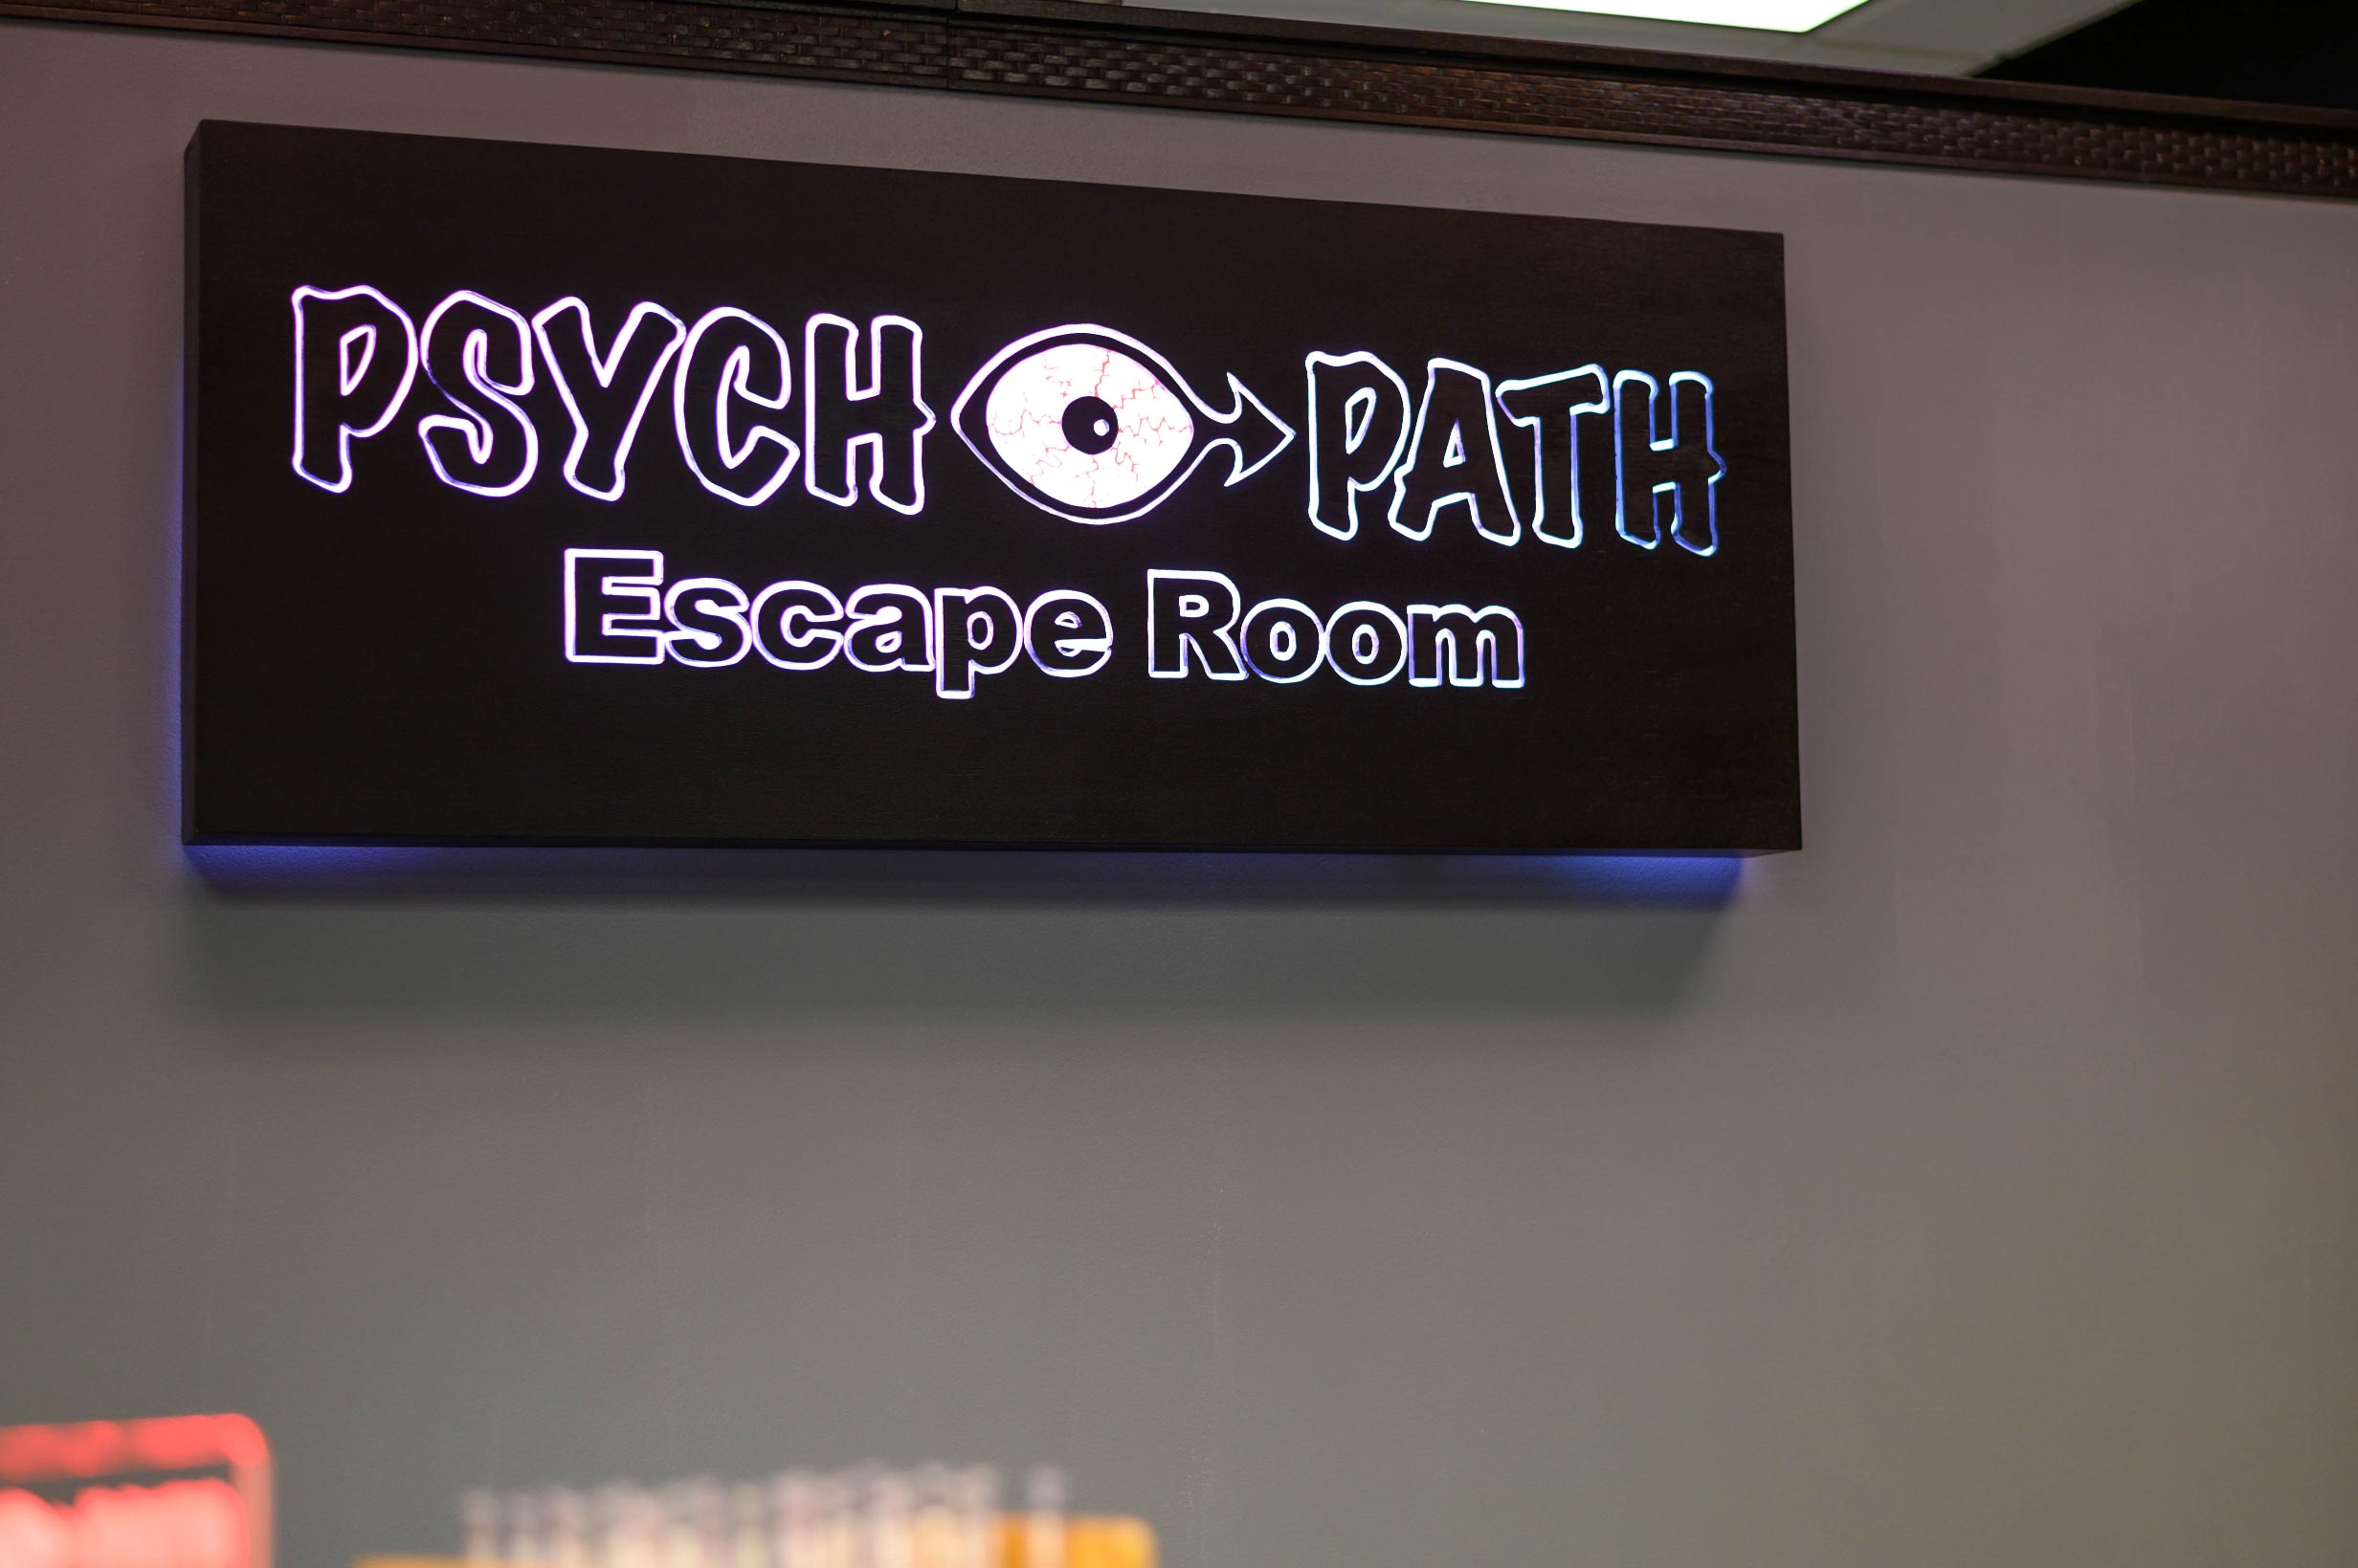 Turn your hobby into your business. These escape room fans did!